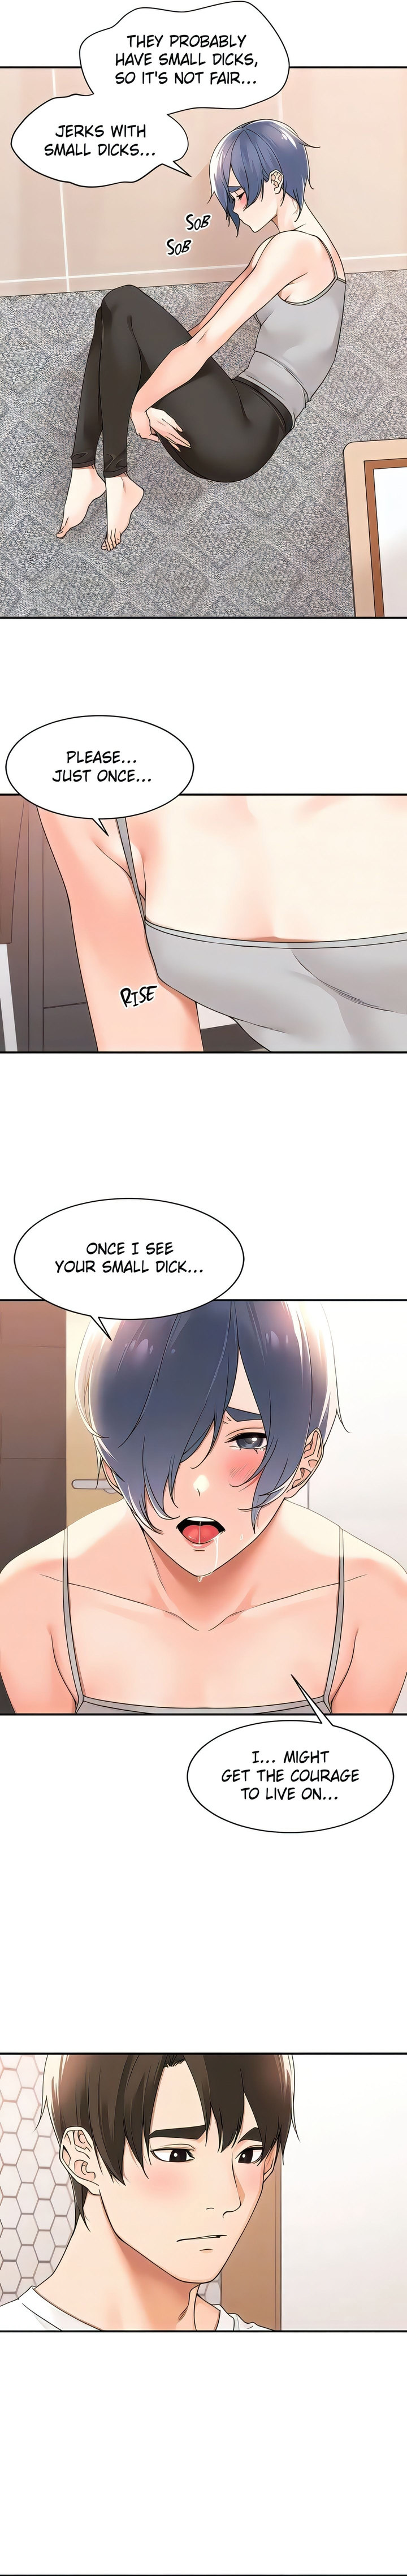 Manager, Please Scold Me - Chapter 27 Page 7